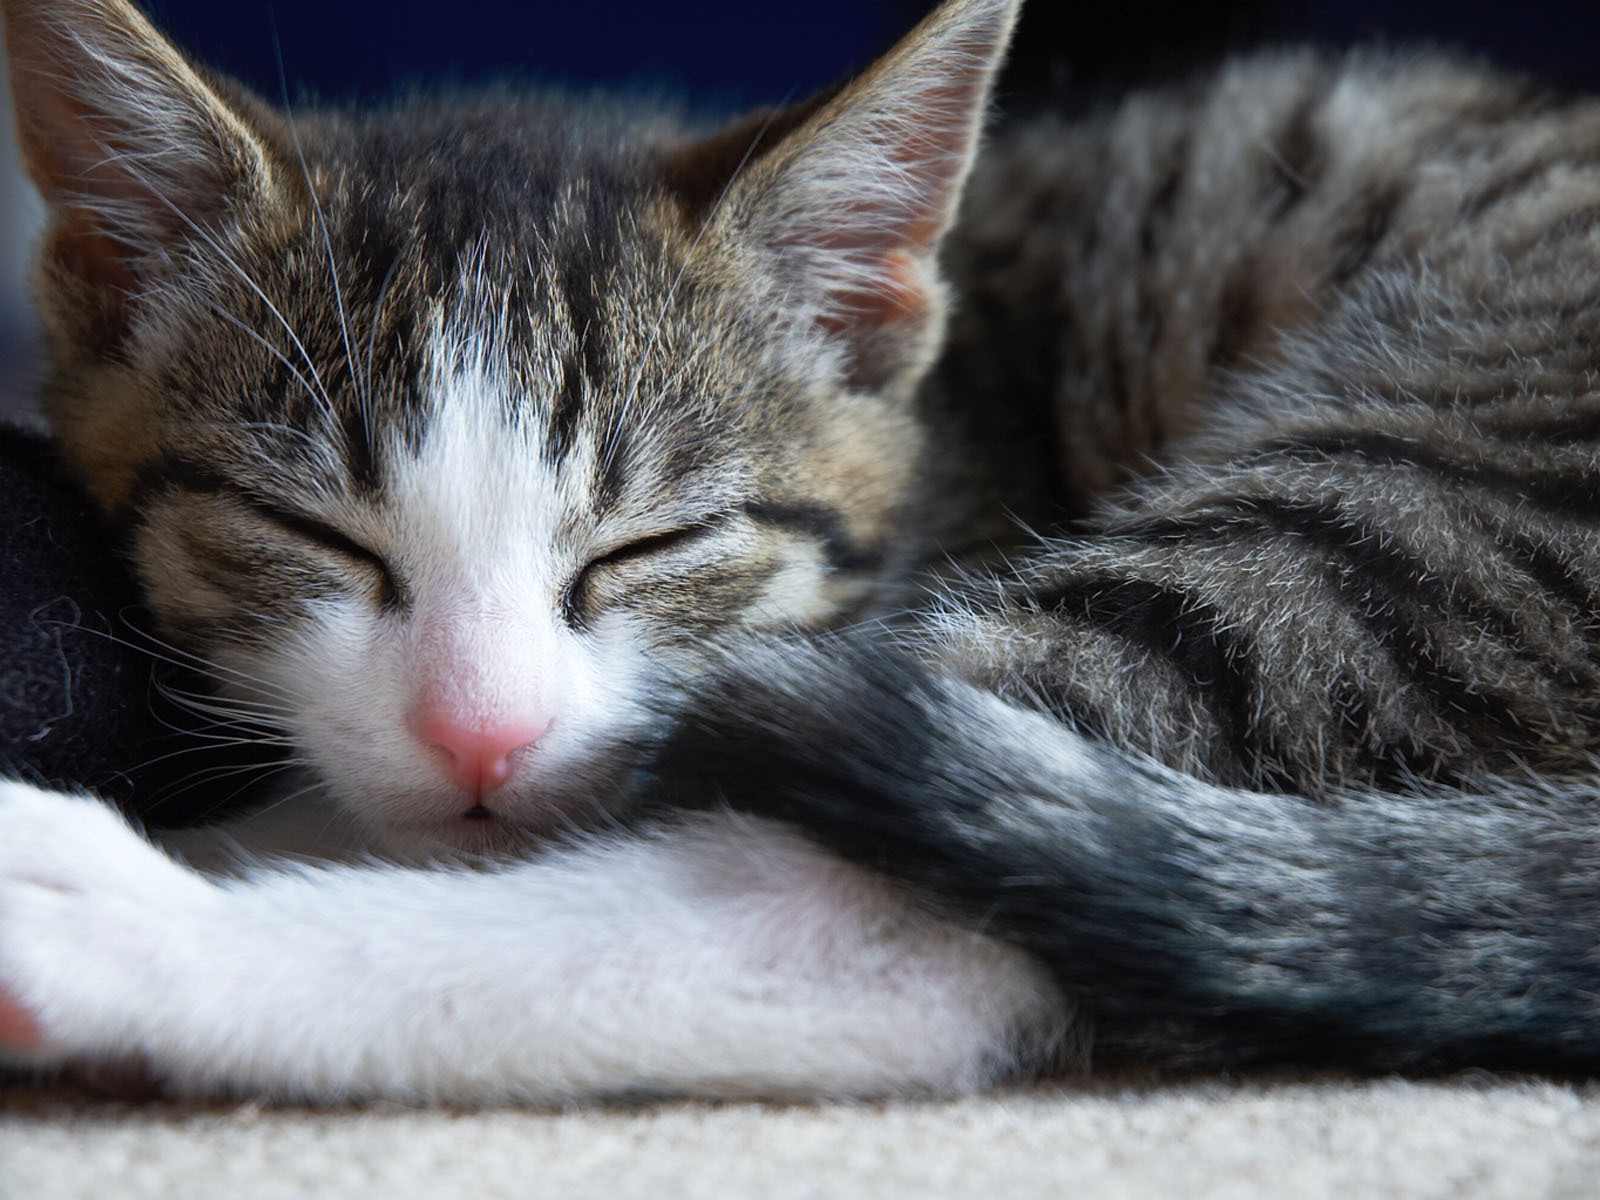 Little cute sleeping cat wallpapers and images - wallpapers, pictures ...